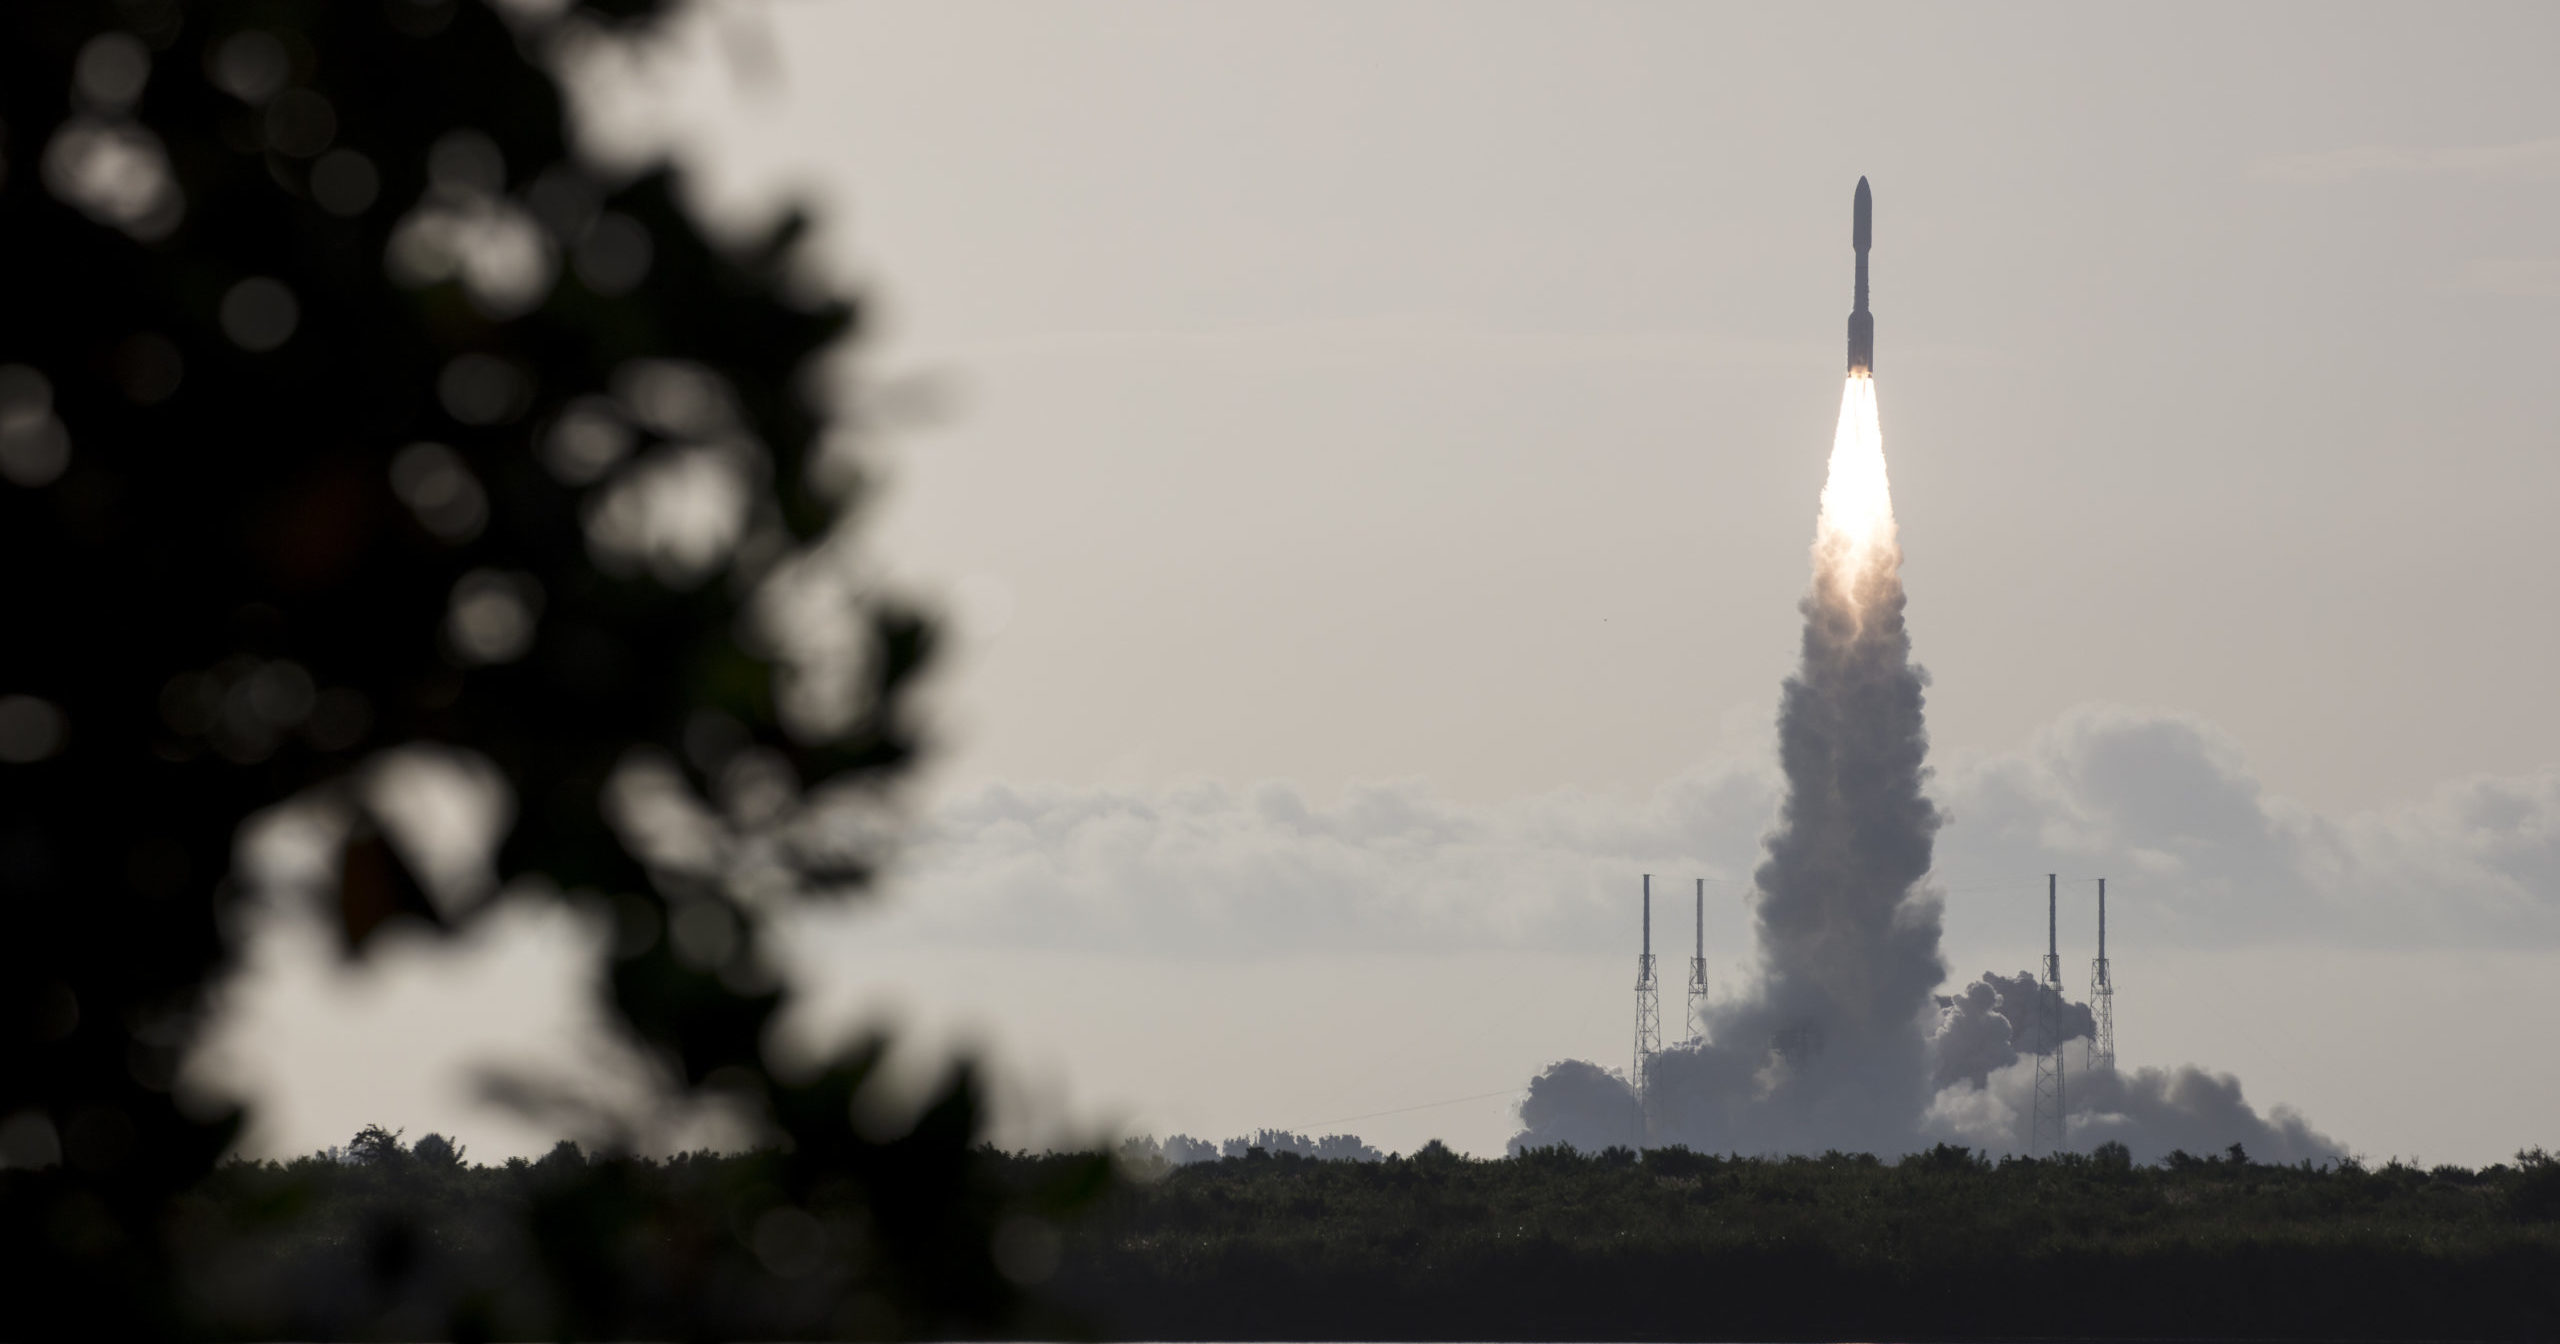 In this photo provided by NASA, an Atlas V rocket blasts off at the Cape Canaveral Air Force Station on July 30, 2020, in Cape Canaveral, Florida. The launch of NASA's Perseverance is the first step in an ambitious project to bring the first Martian rock samples back to Earth to be analyzed for evidence of life.